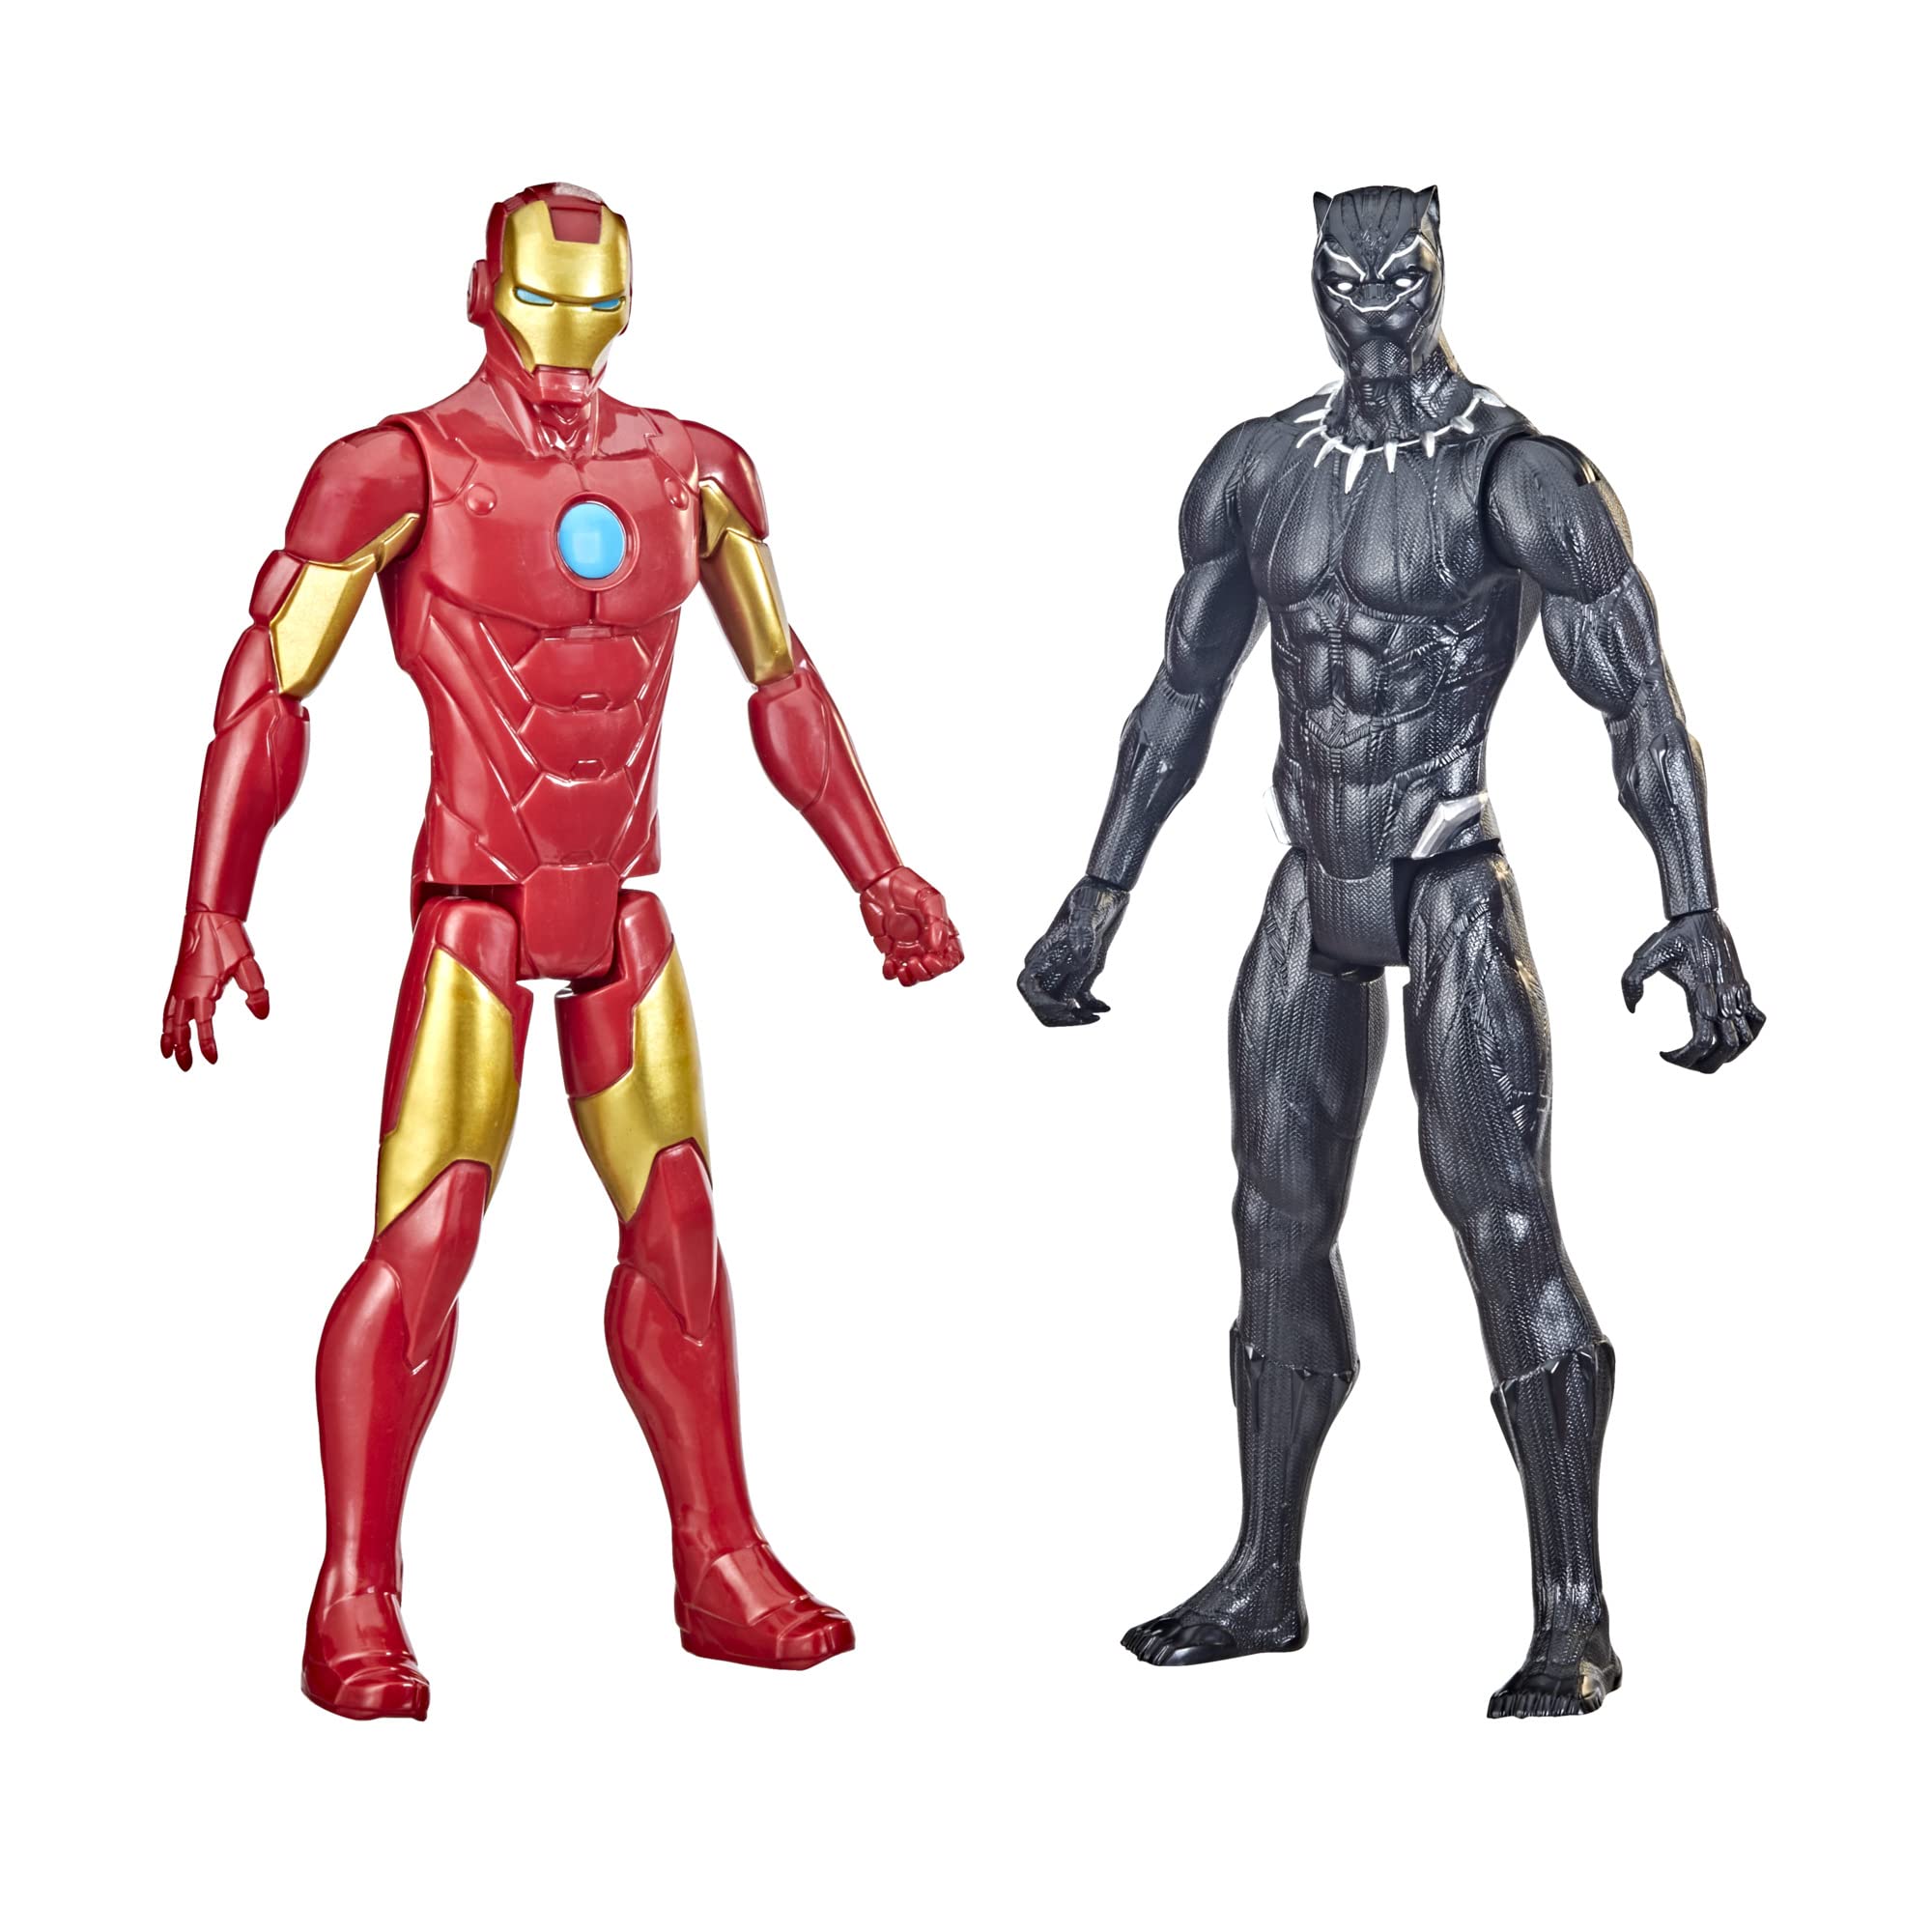 Marvel Hasbro Titan Hero Series Action Figure Multipack,for Kids Ages 4 and Up (Amazon Exclusive)